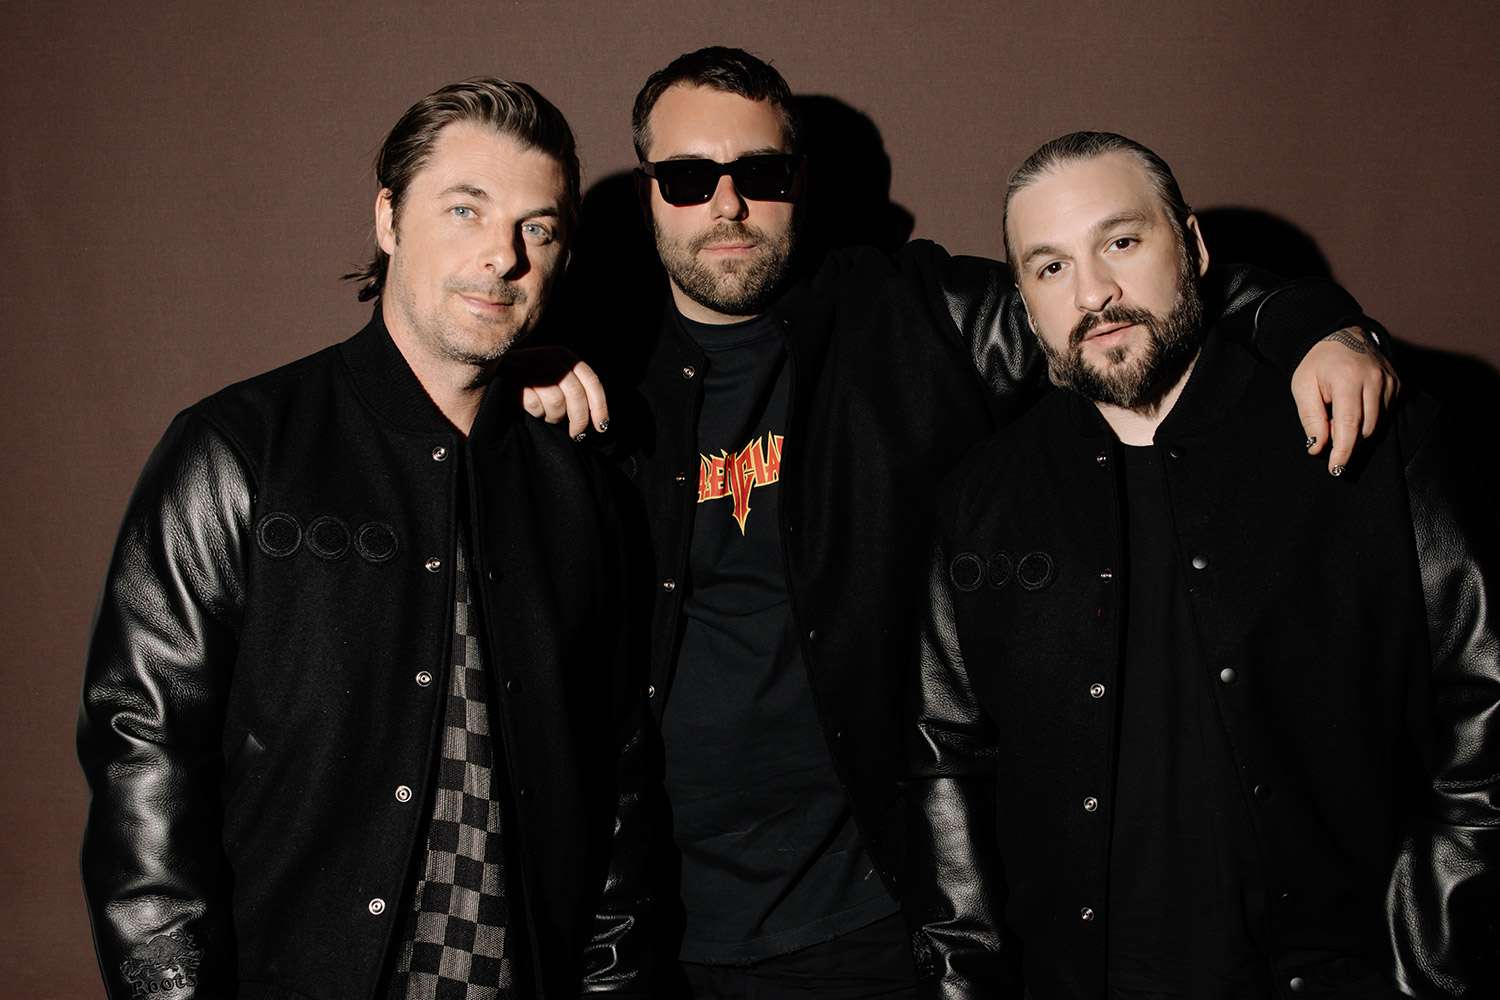 Swedish House Mafia at their afterparty with Spotify and Roots on April 15 (credit: Virisa Young)